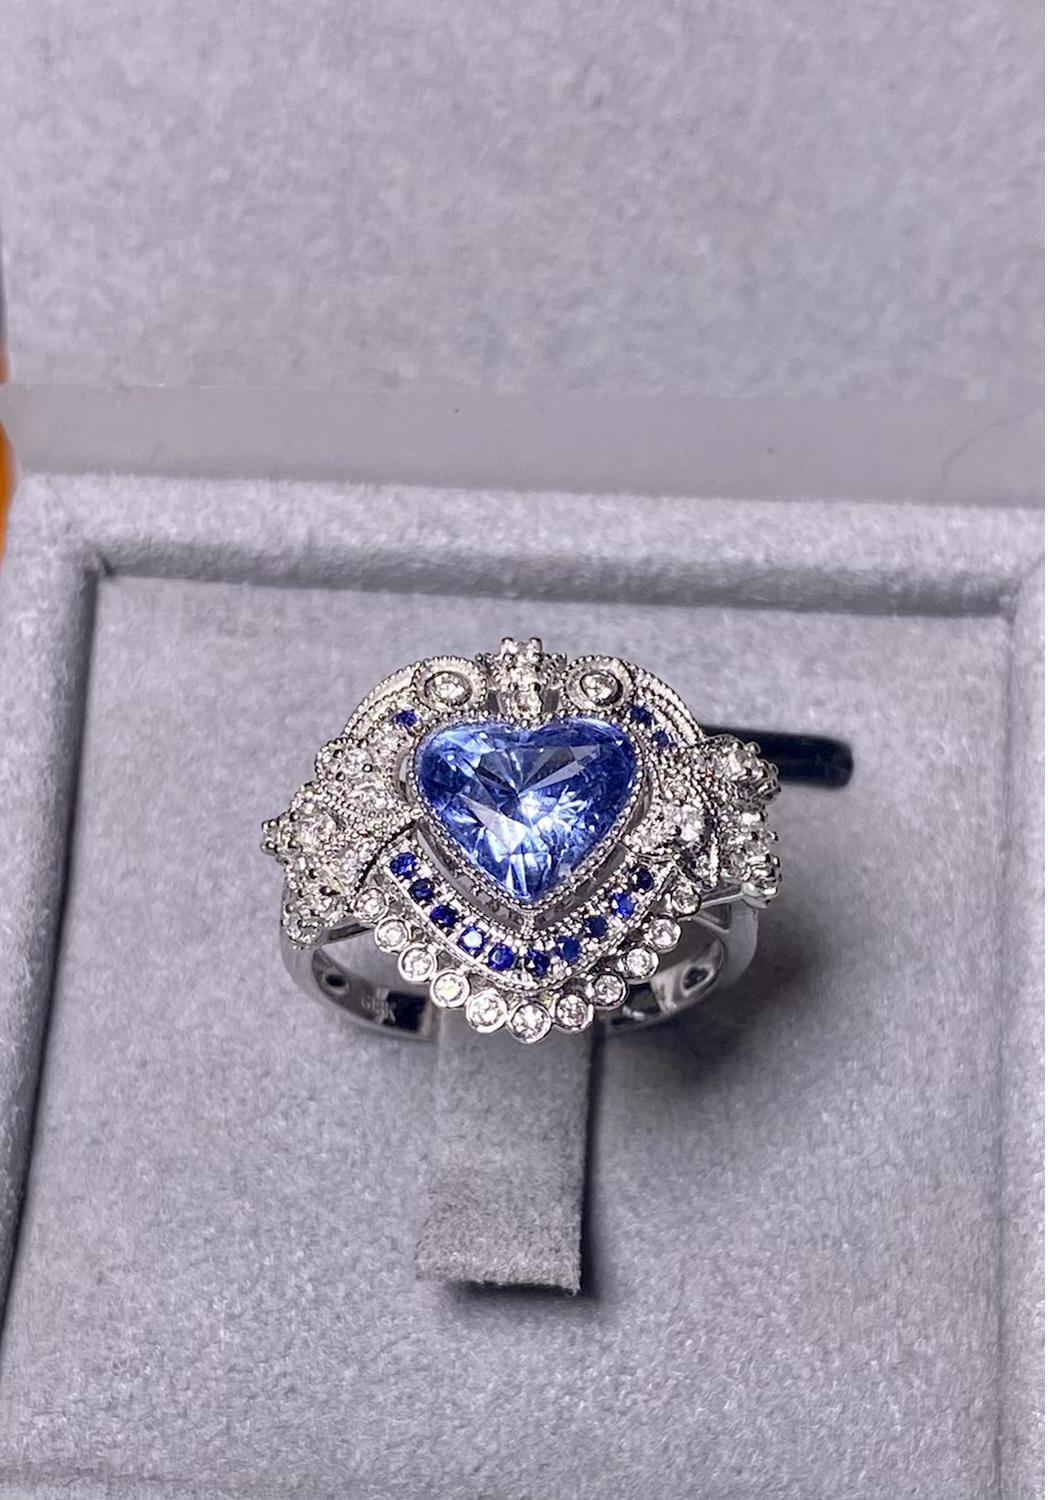 2.49ct Sapphire and Diamond Ring in 18k White Gold

Main Sapphire weight is 2.49ct
Total Natural Diamond weight is 

US Ring size is 7, The Inner Diameter of the Ring is 17.32mm